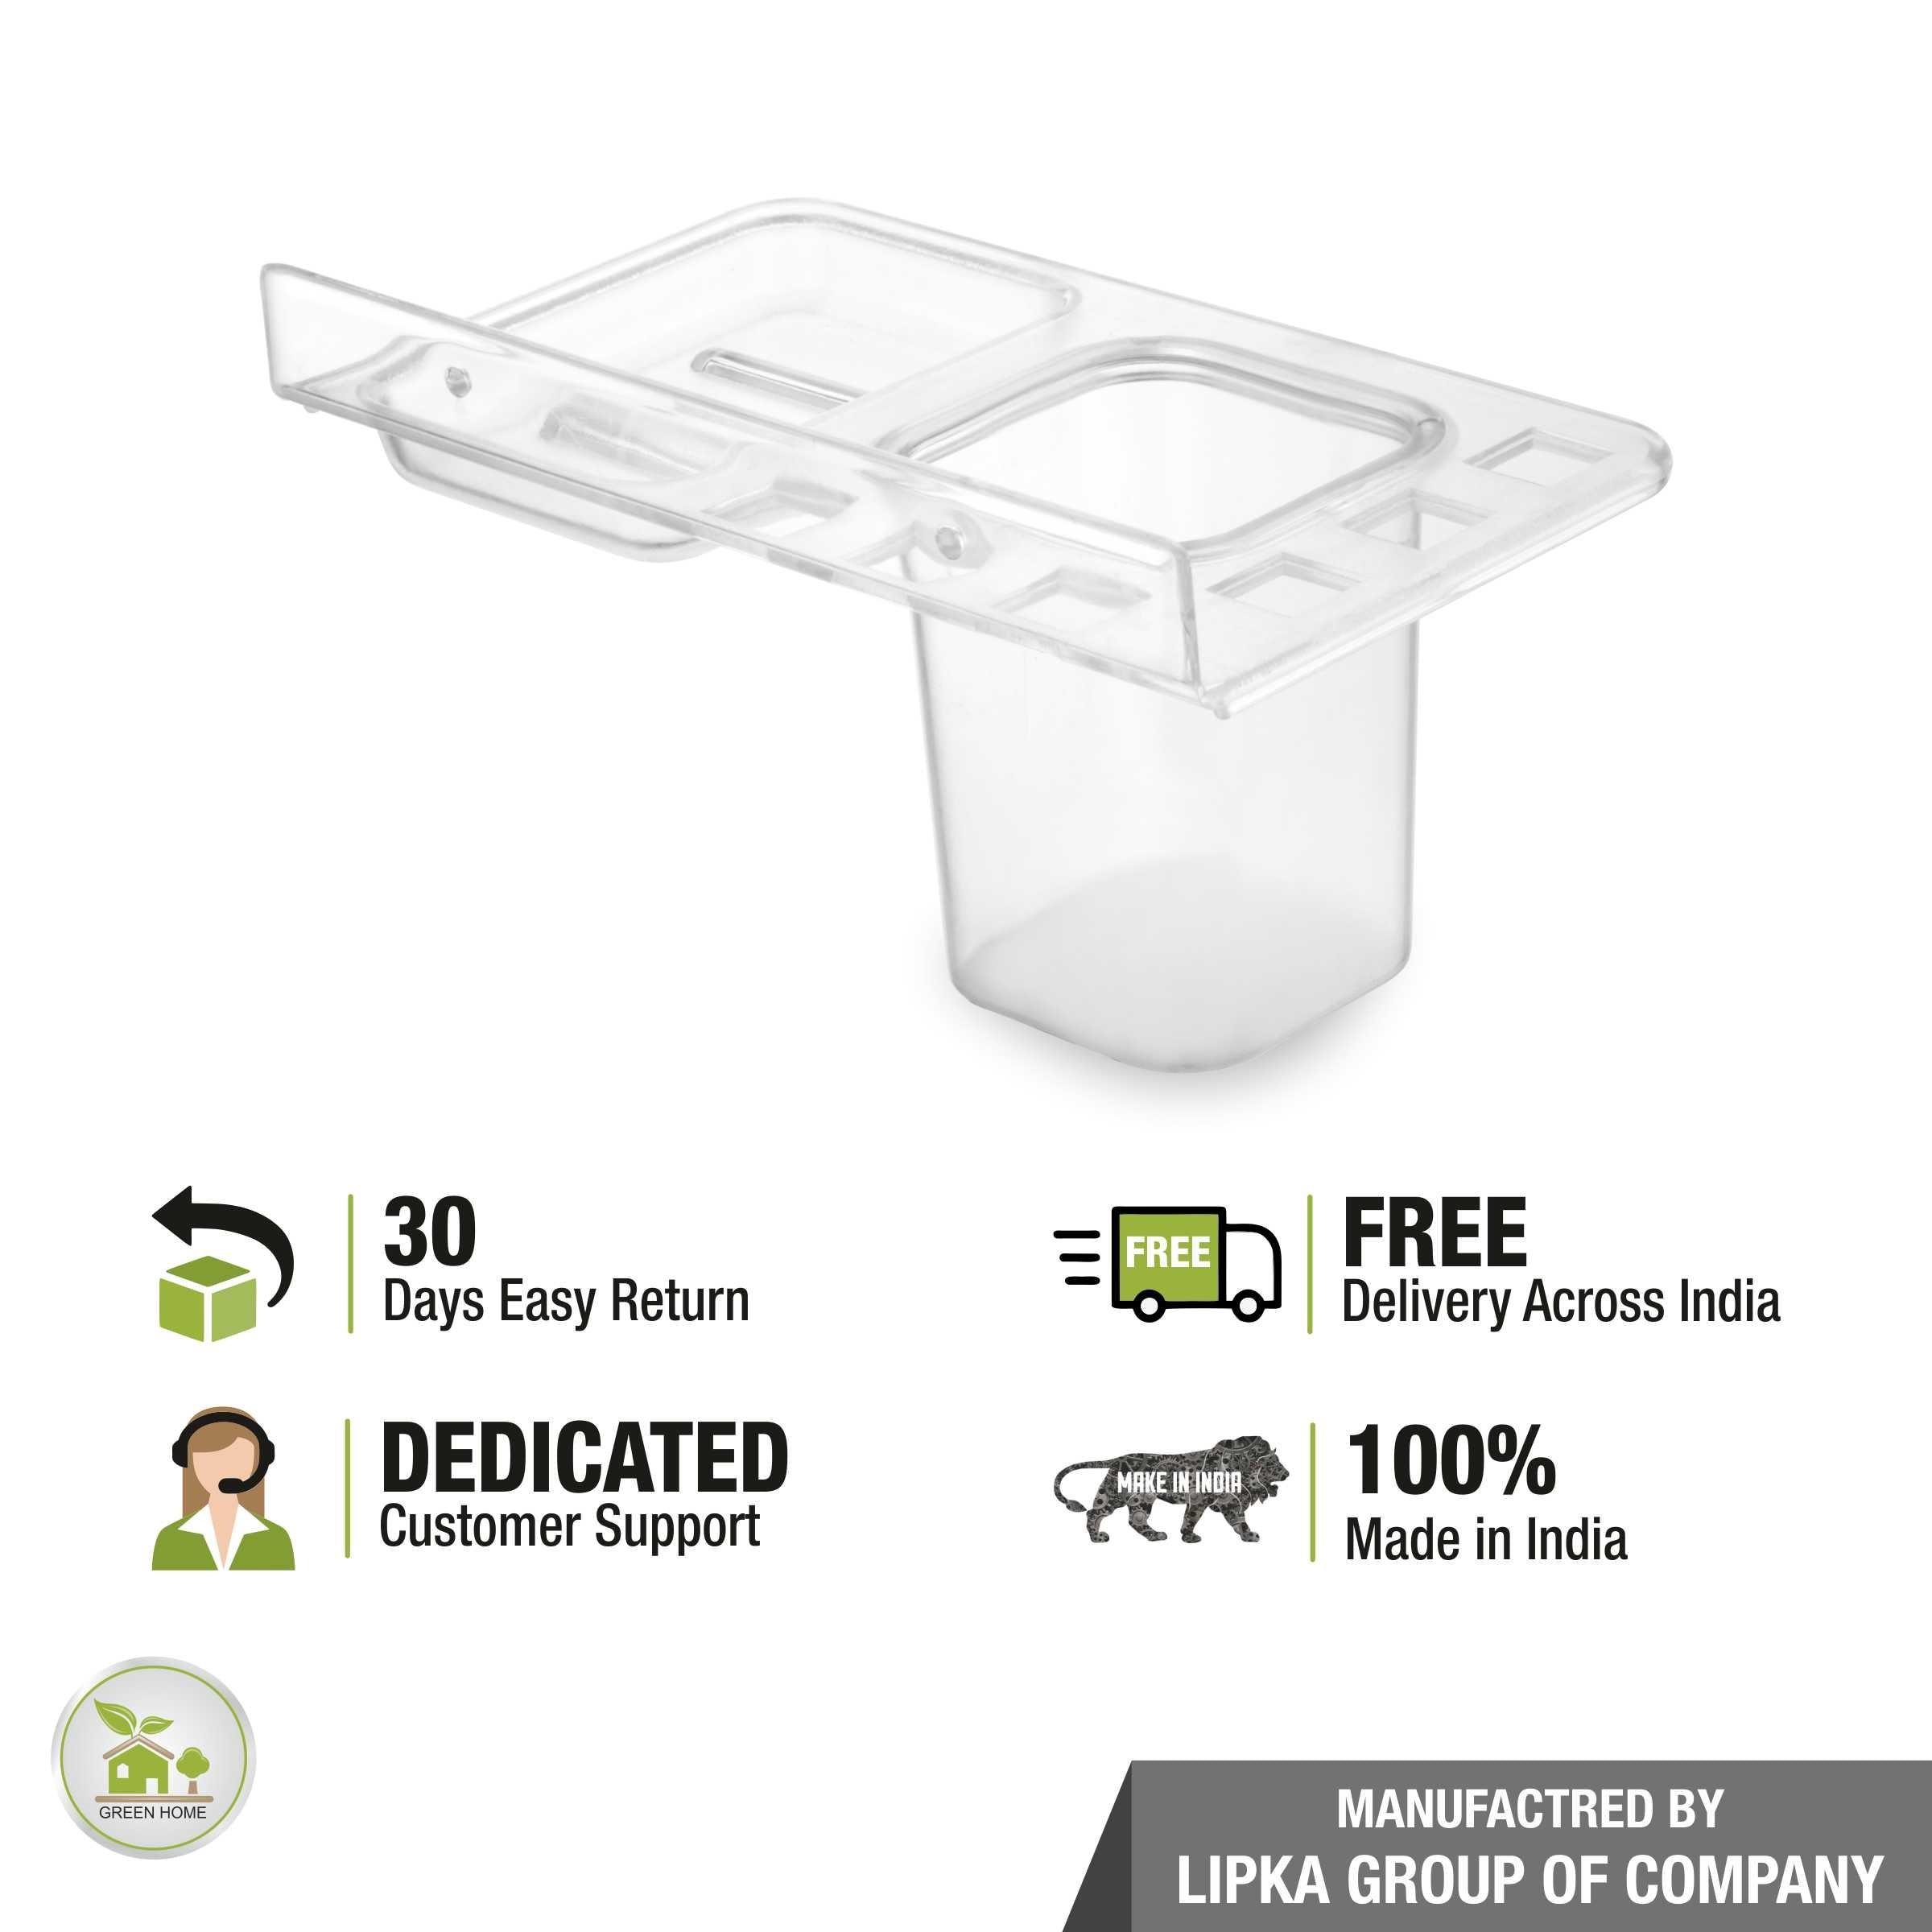 3-in-1 Shelf Tray (Tumbler, Toothbrush Holder & Soap Dish) free delivery